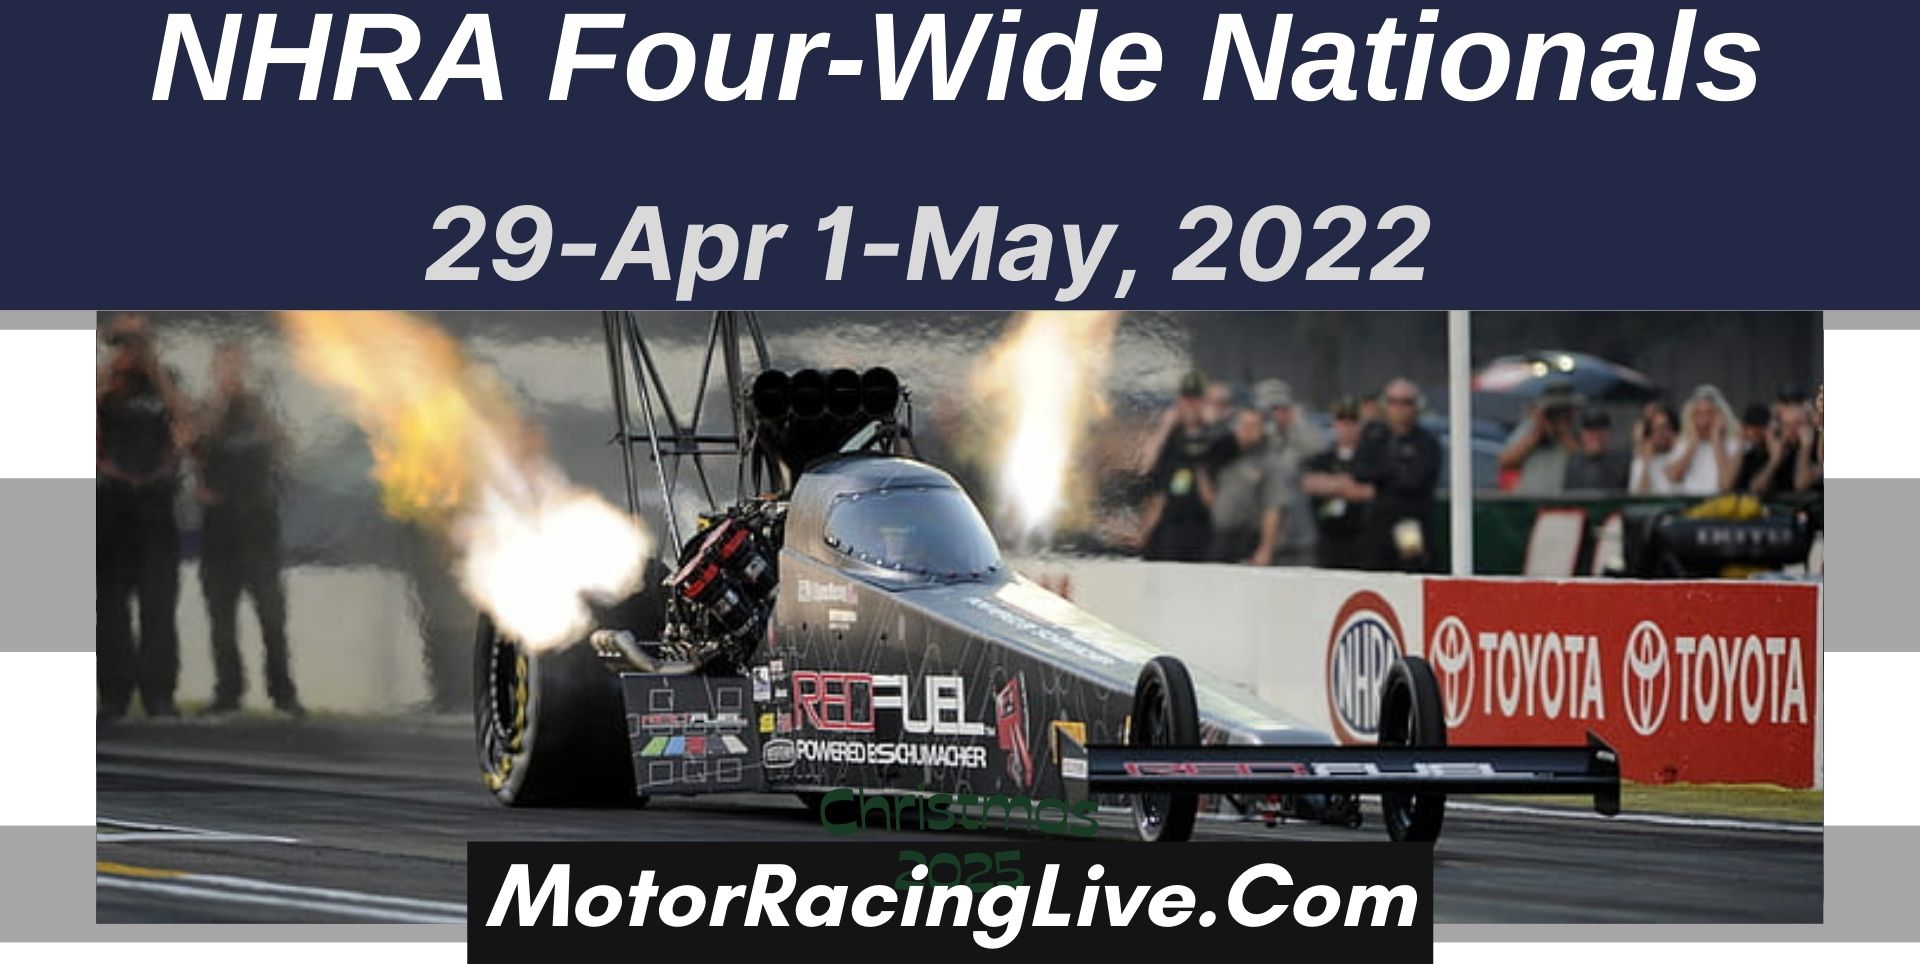 NHRA Four-Wide Nationals 2022 Live Streaming